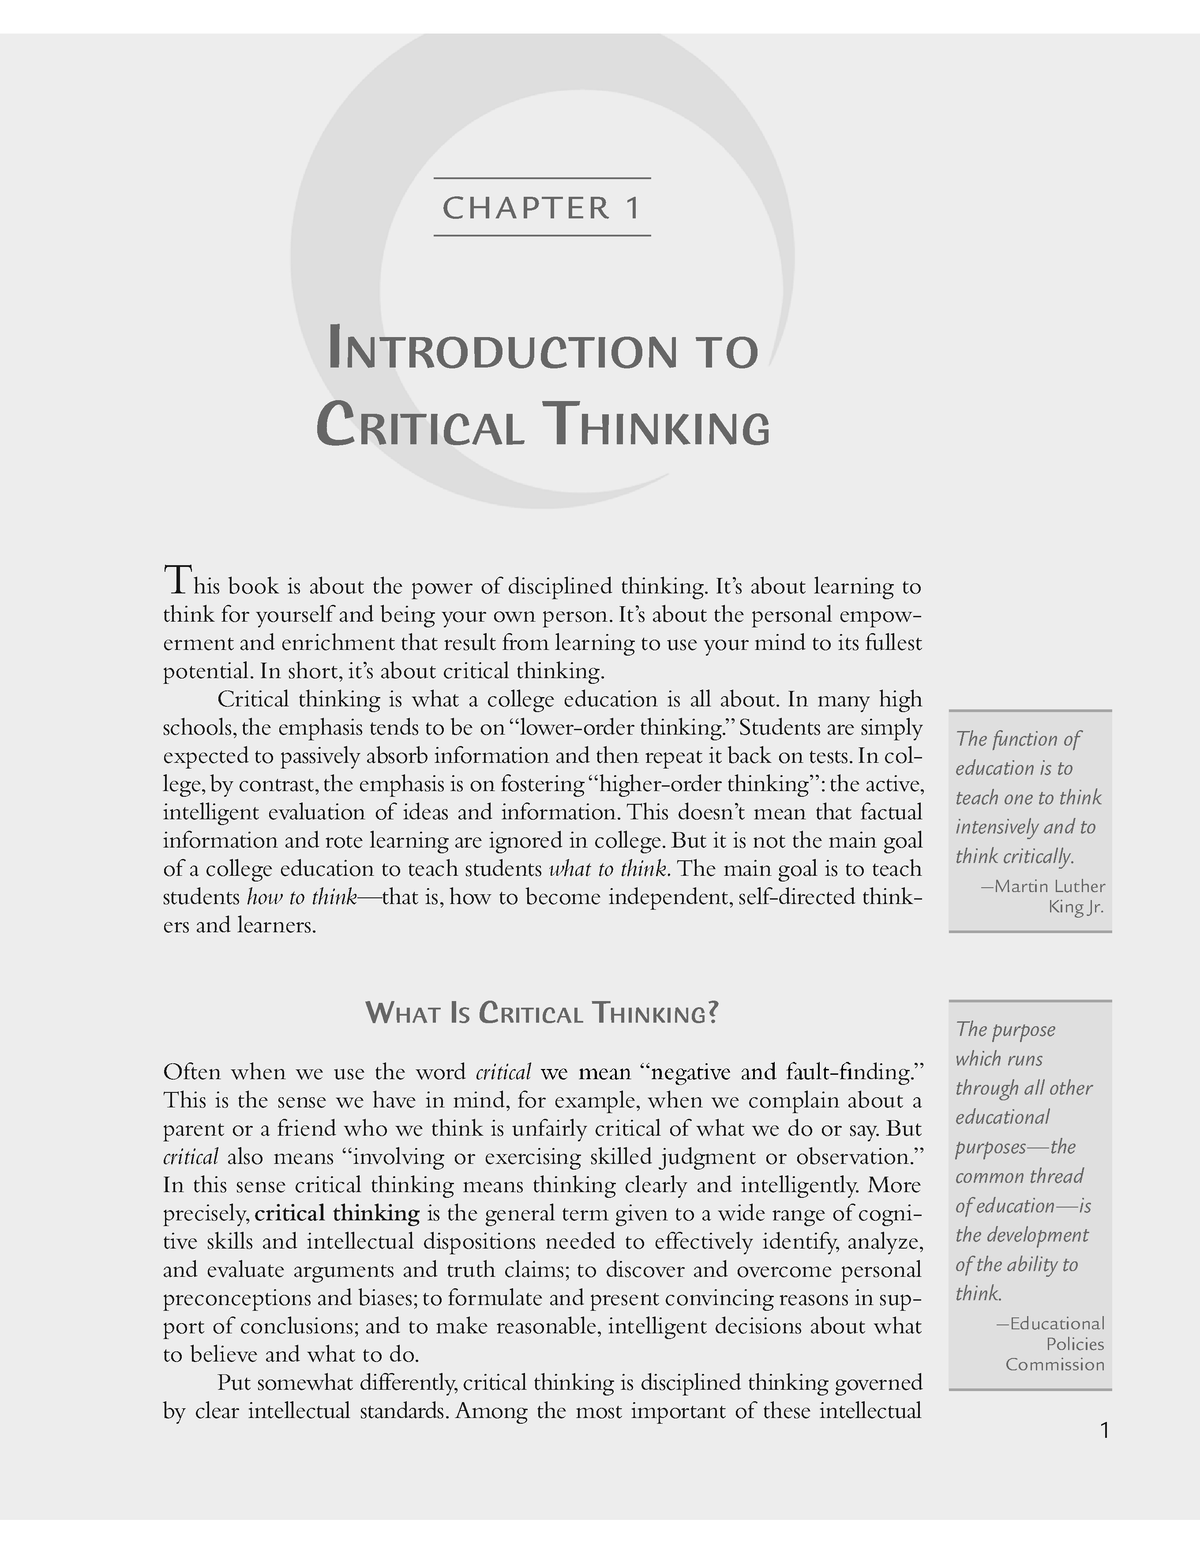 what is critical thinking chapter 1